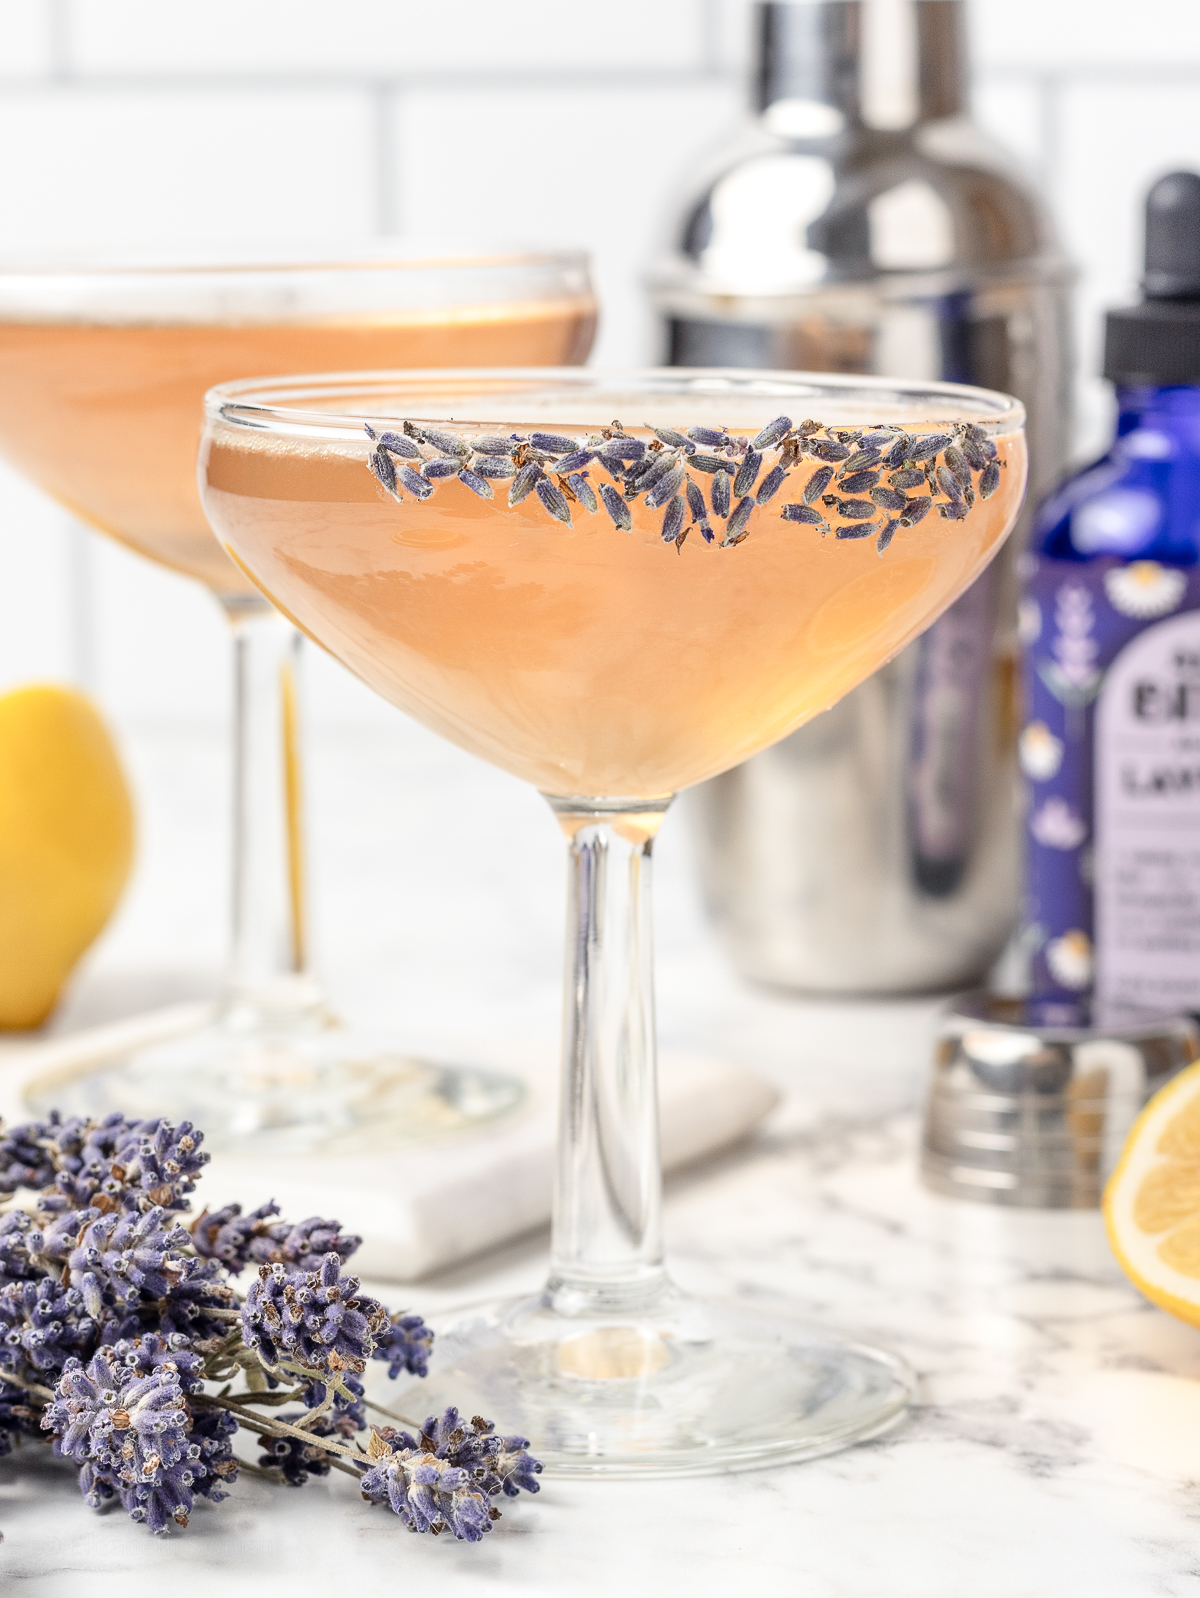 A coupe glass filled with the mocktail and garnished with a lavender bud rim and more lavender flowers on the side.